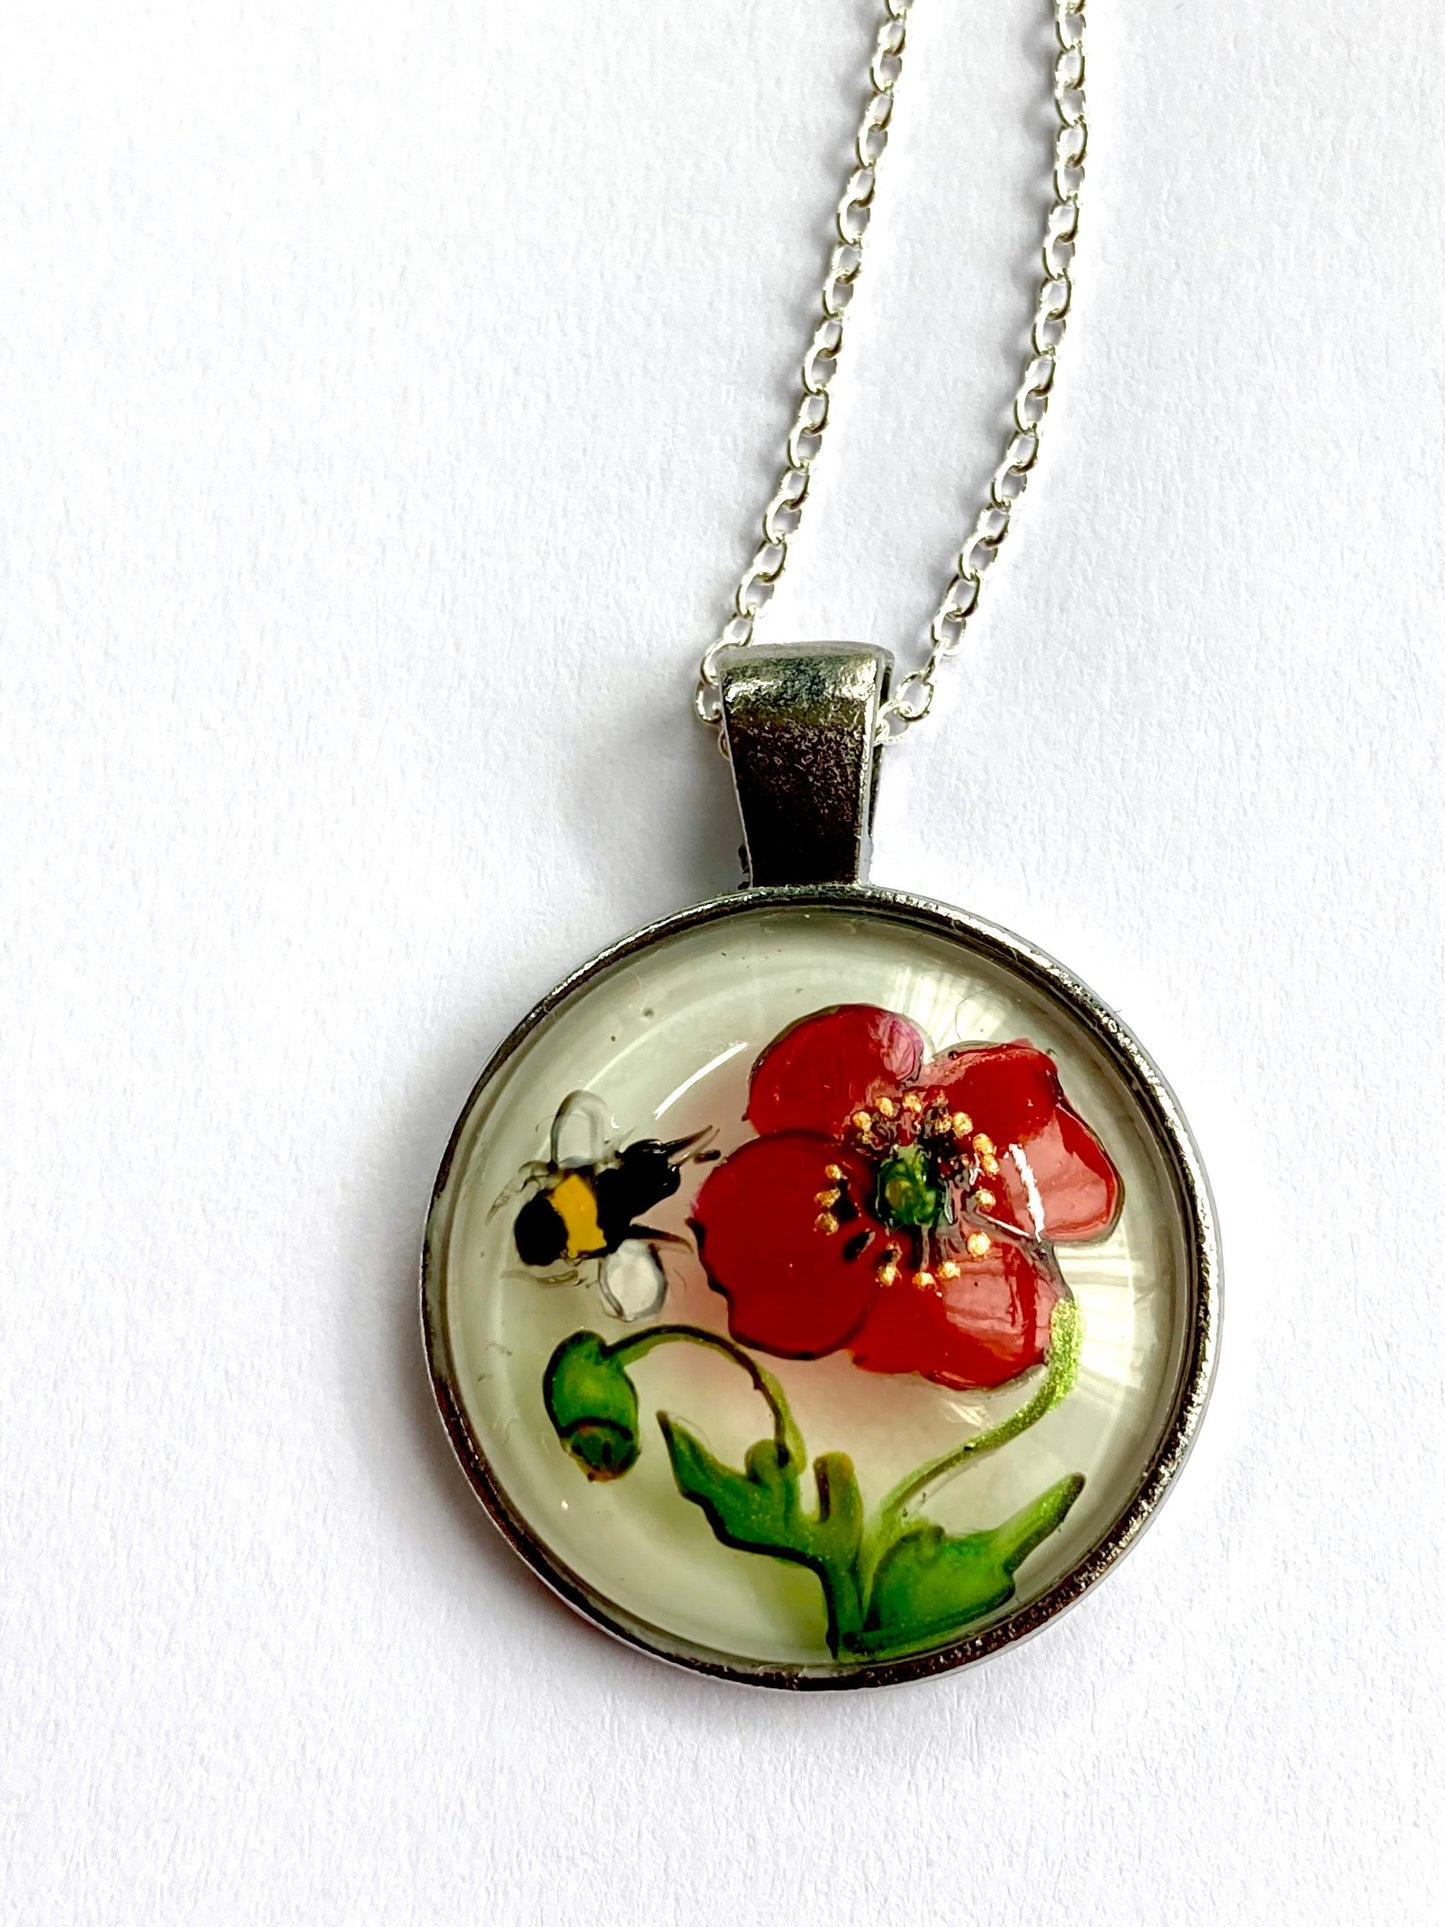 Poppy and Bee hand painted glass pendant necklace